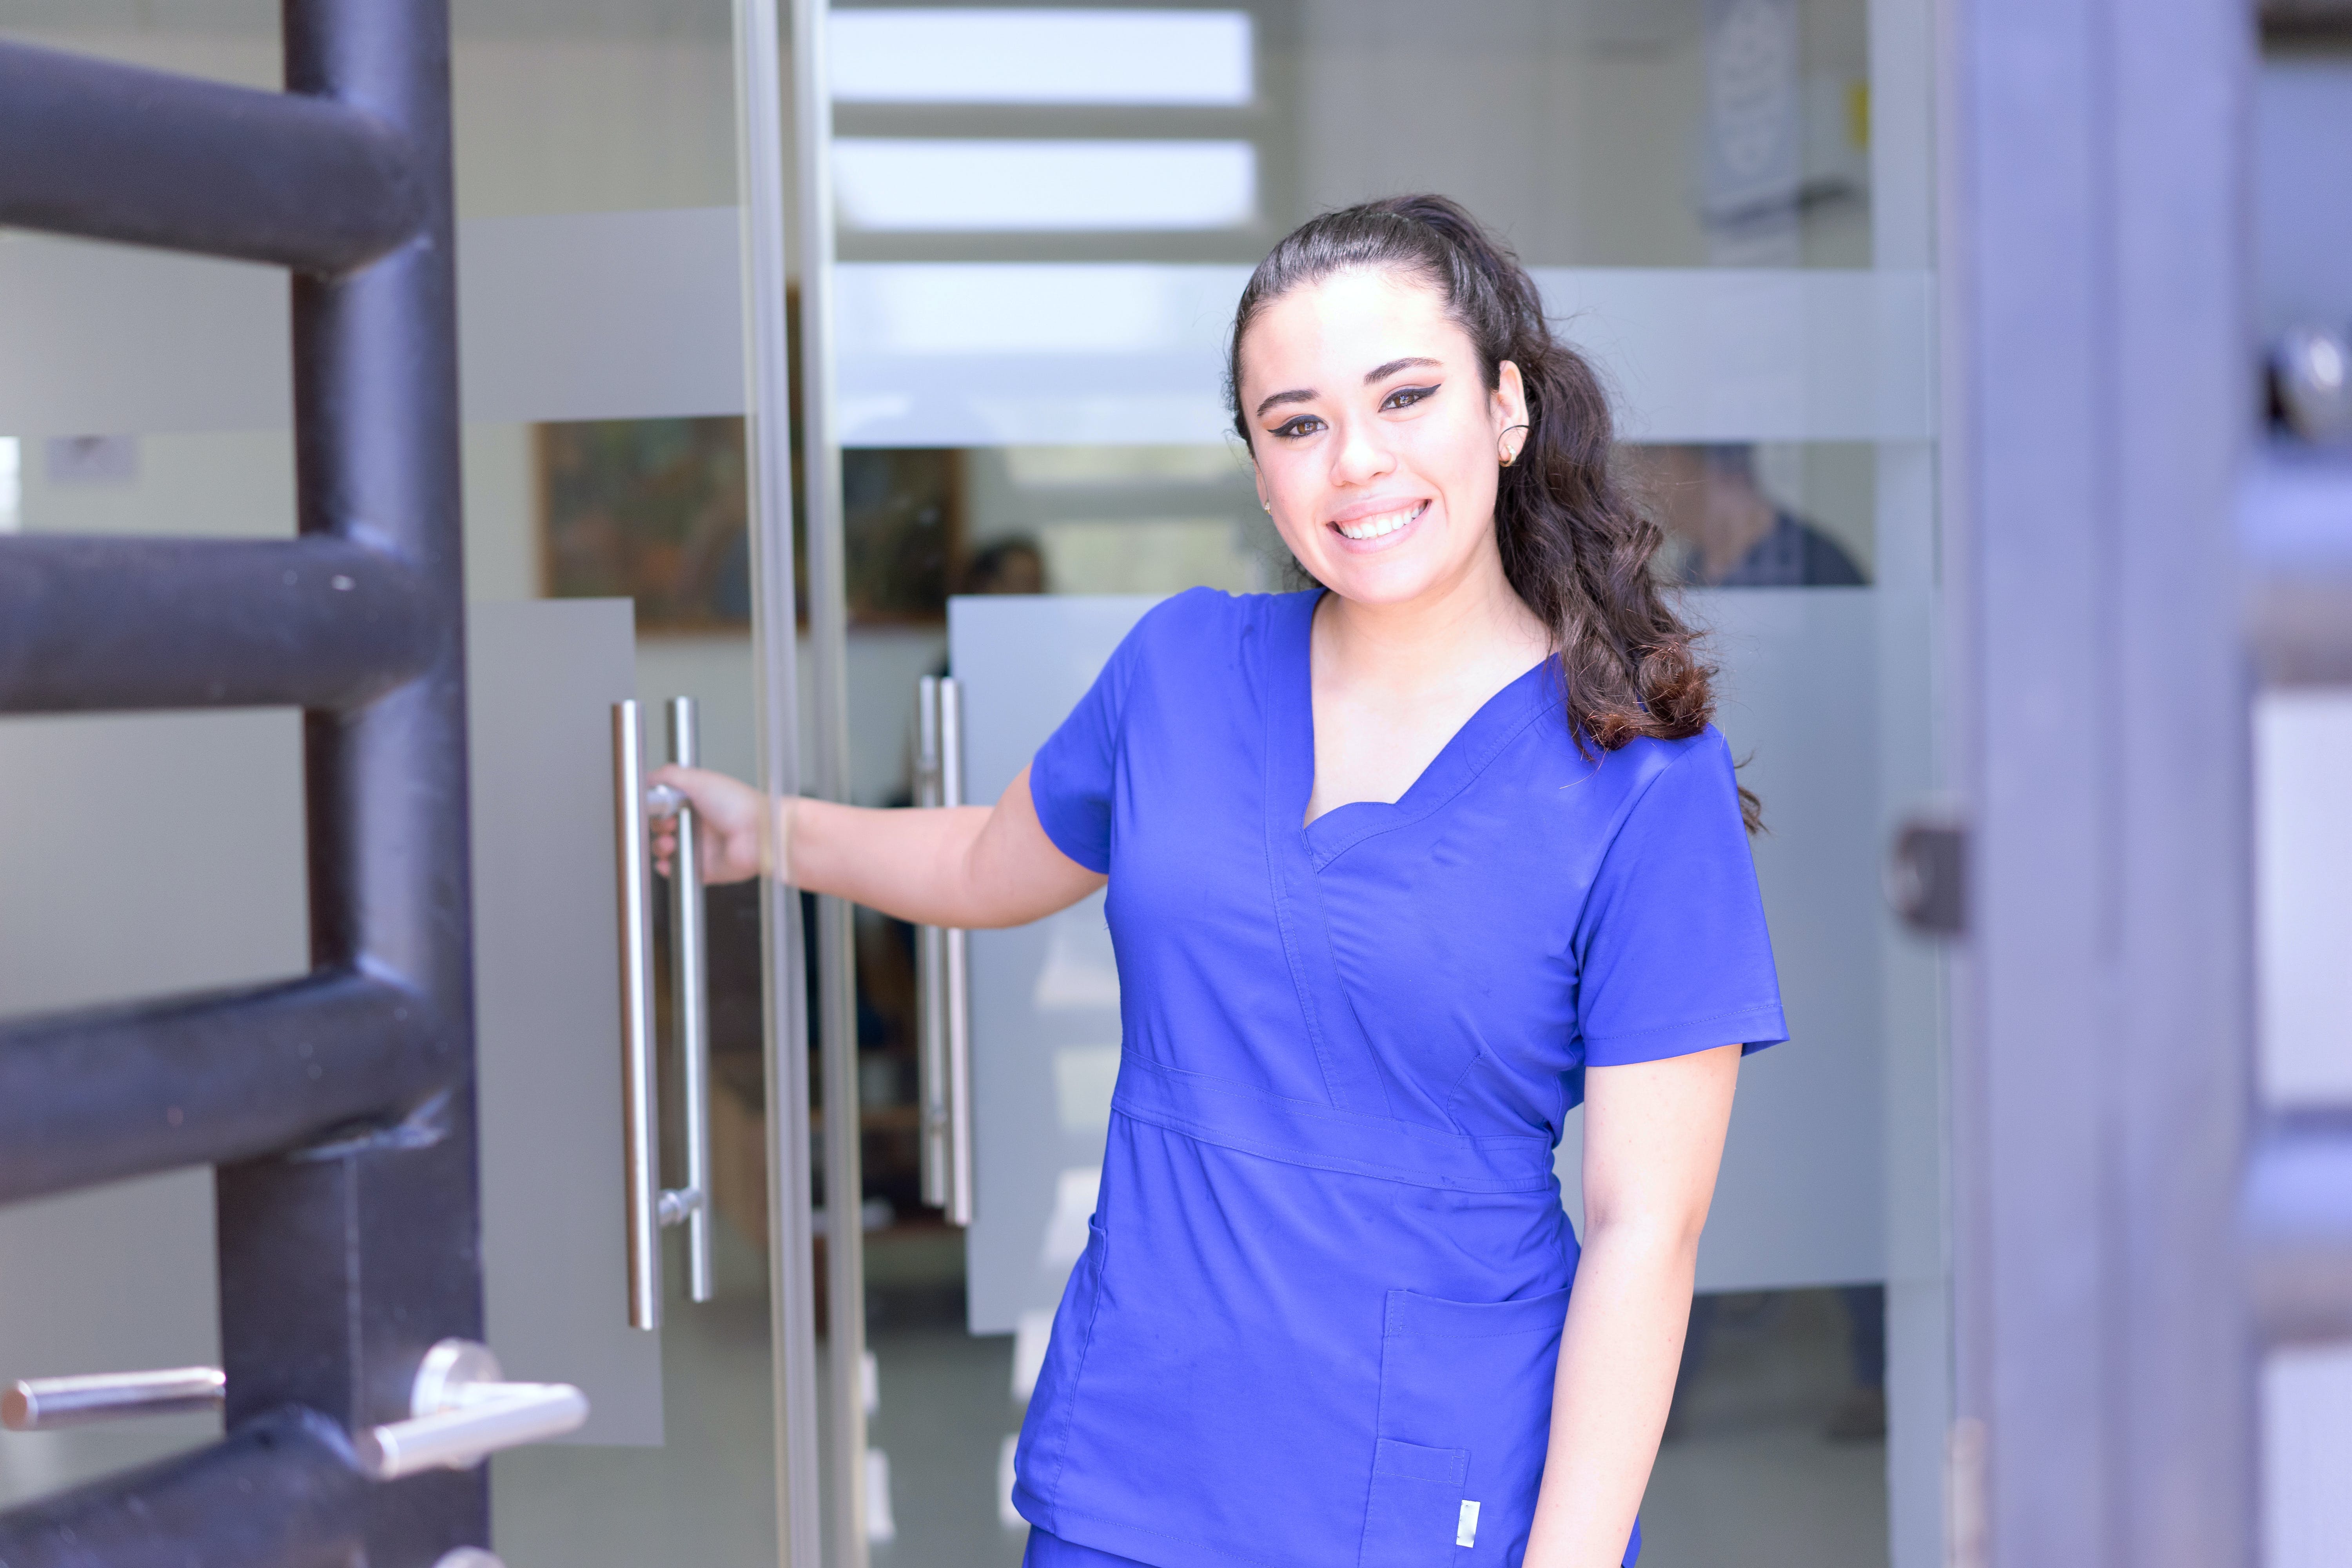 A woman in scrub suit smiling | Source: Pexels